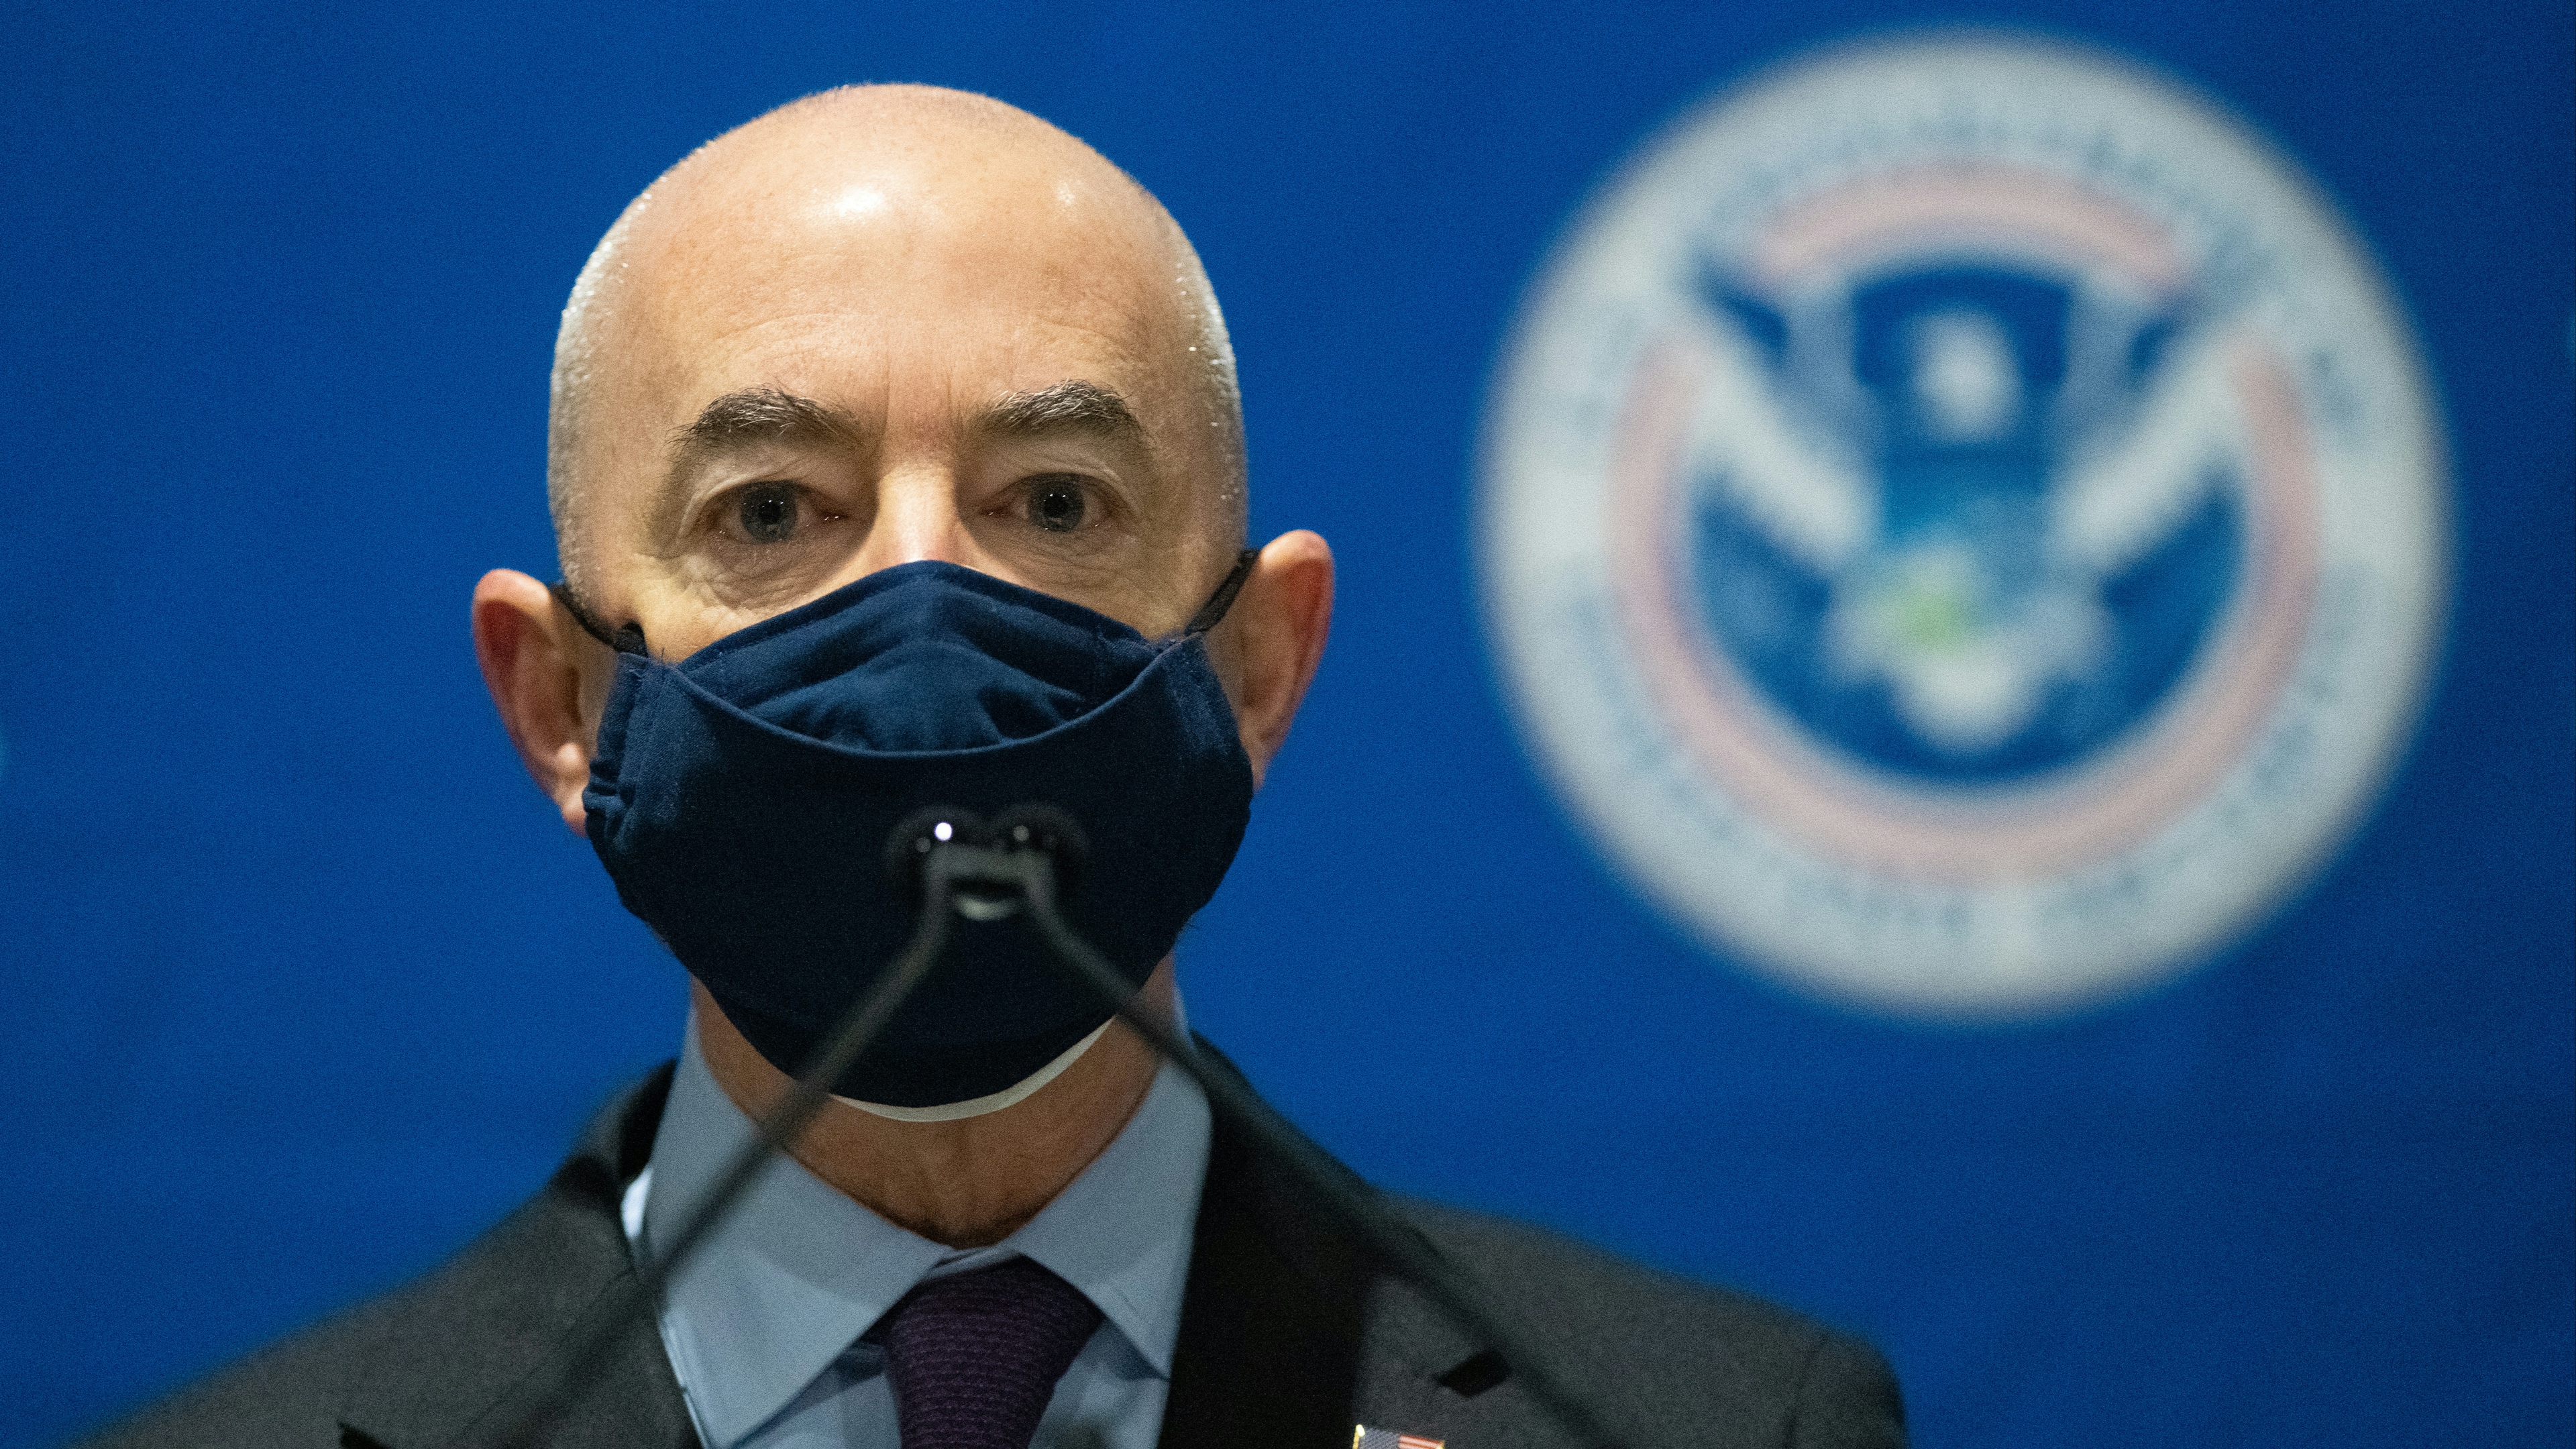 .S. Secretary of Homeland Security Alejandro Mayorkas delivers remarks while visiting a FEMA community vaccination center on March 2, 2021 in Philadelphia.